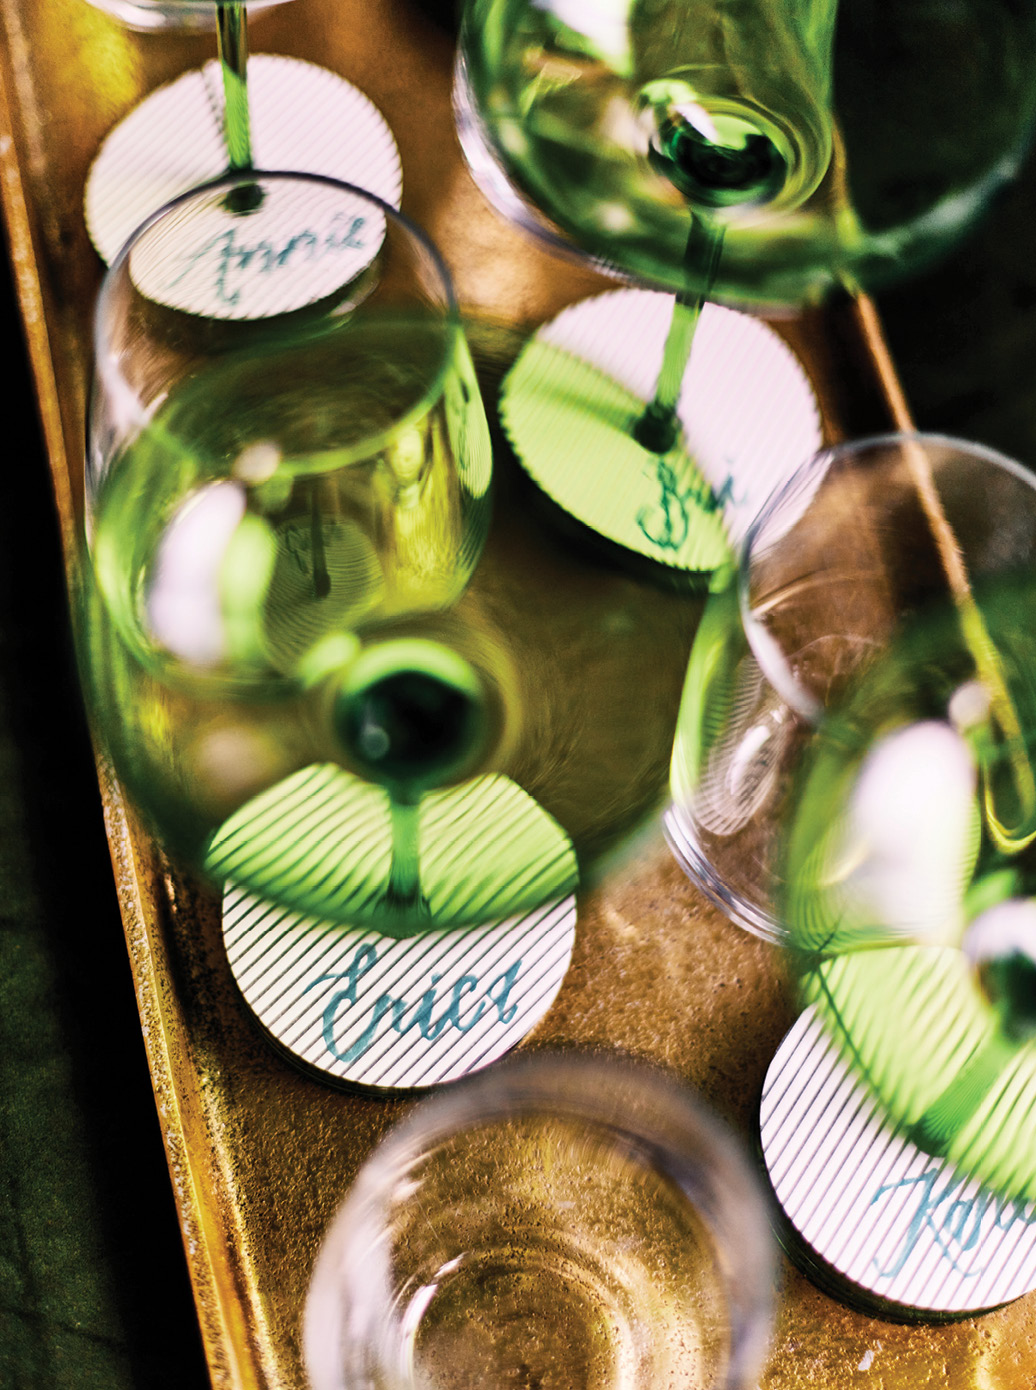 Handblown champagne glasses by Charleston enterprise Estelle Colored Glass are labeled with name tags to prevent accidental swapping.